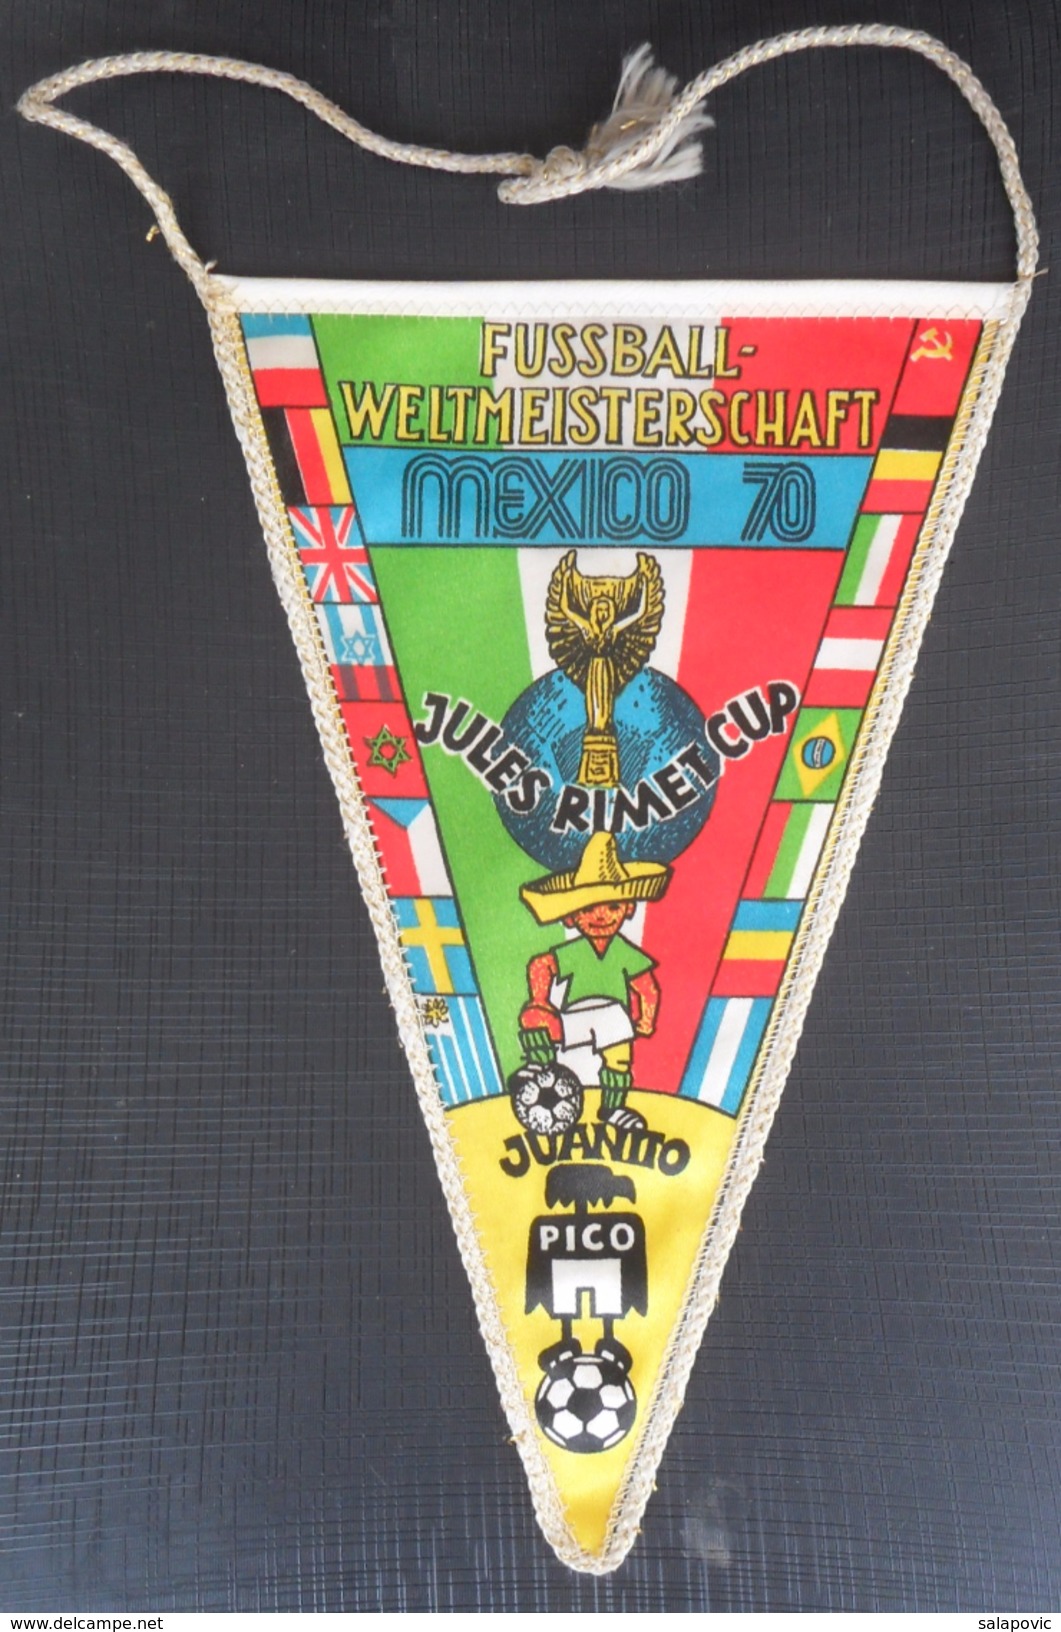 Fußball-Weltmeisterschaft 1970 Mexico,  FIFA World Cup  FOOTBALL CLUB SOCCER / FUTBOL / CALCIO, OLD PENNANT, SPORTS FLAG - Habillement, Souvenirs & Autres